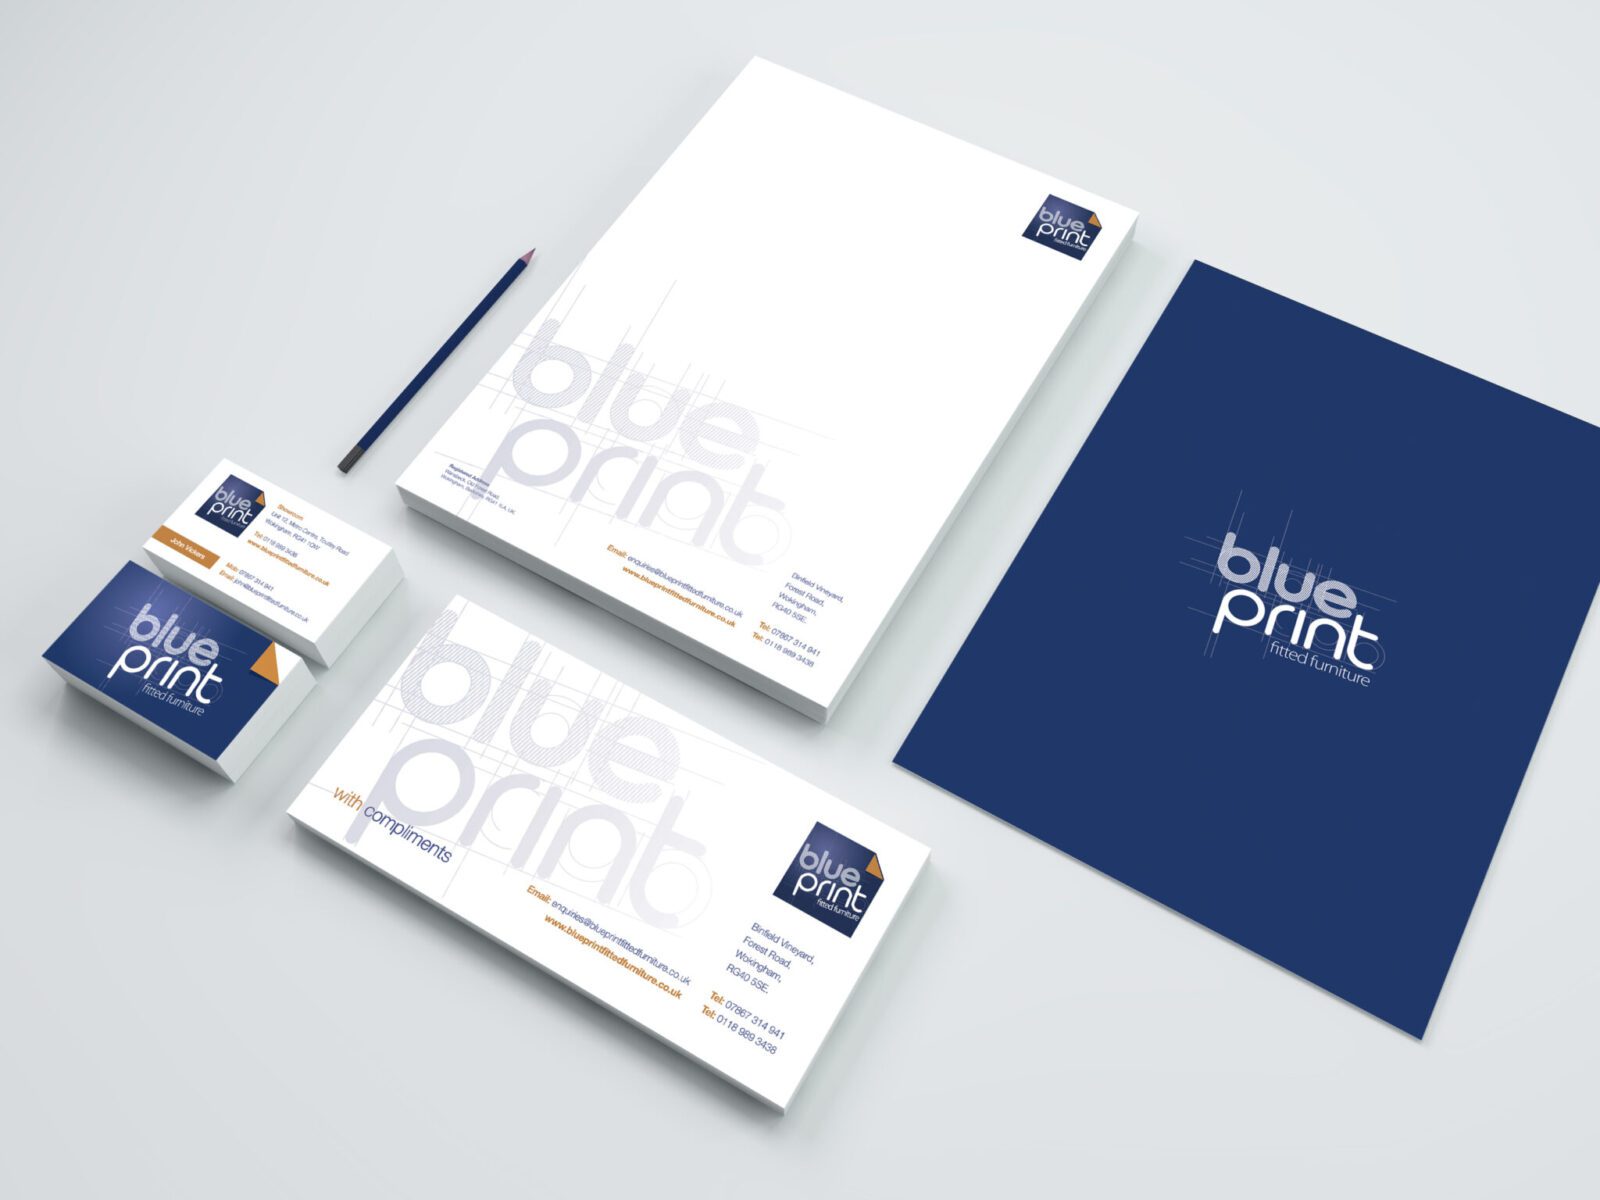 Mock-up of Blue Print Furniture's brand and stationery design.